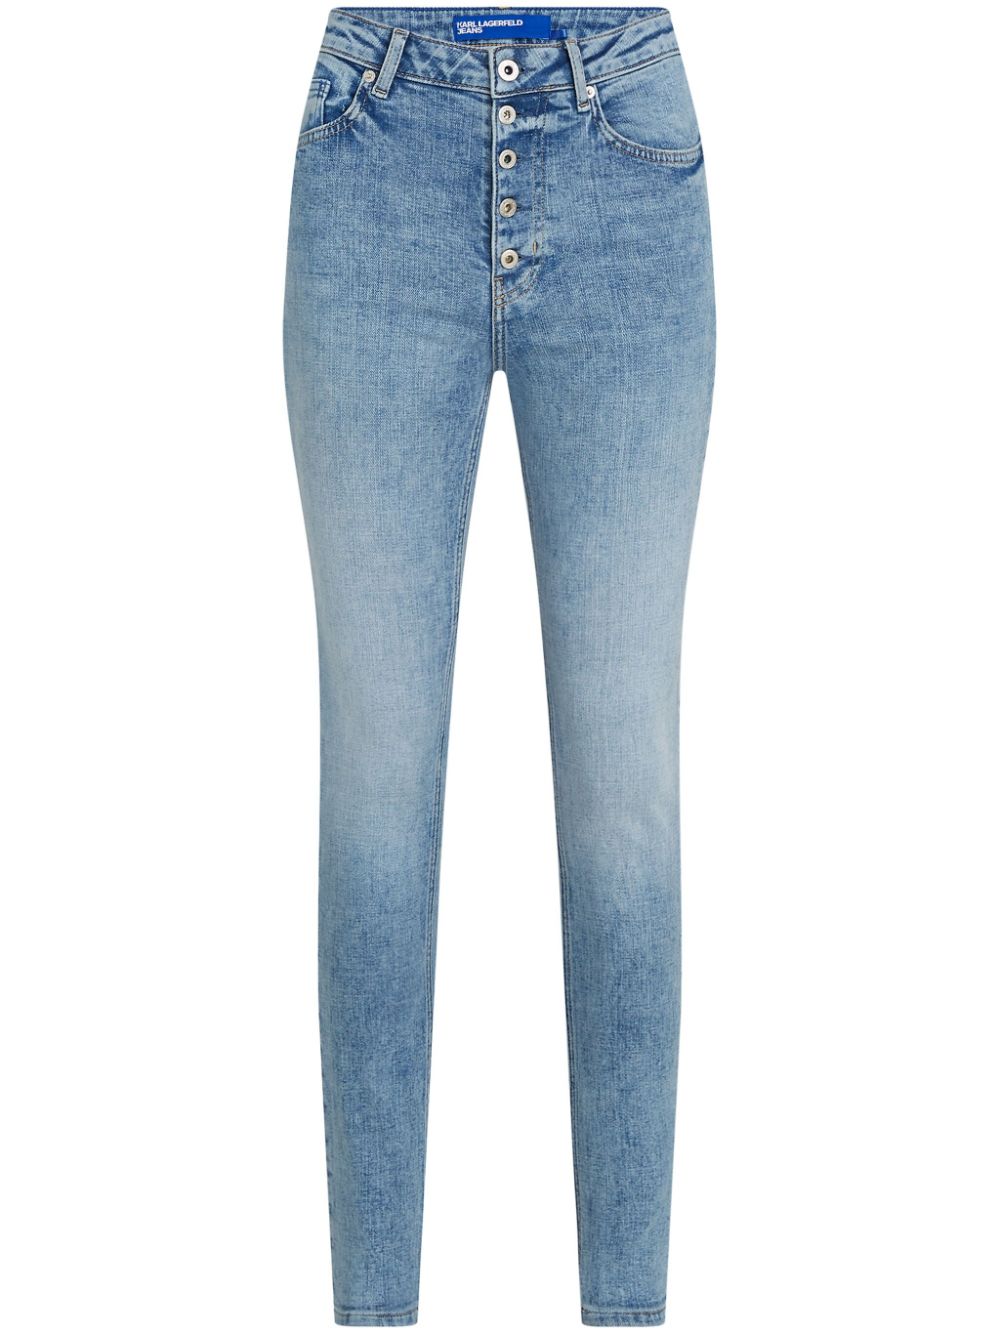 Karl Lagerfeld Jeans High-rise Skinny Jeans In Blue